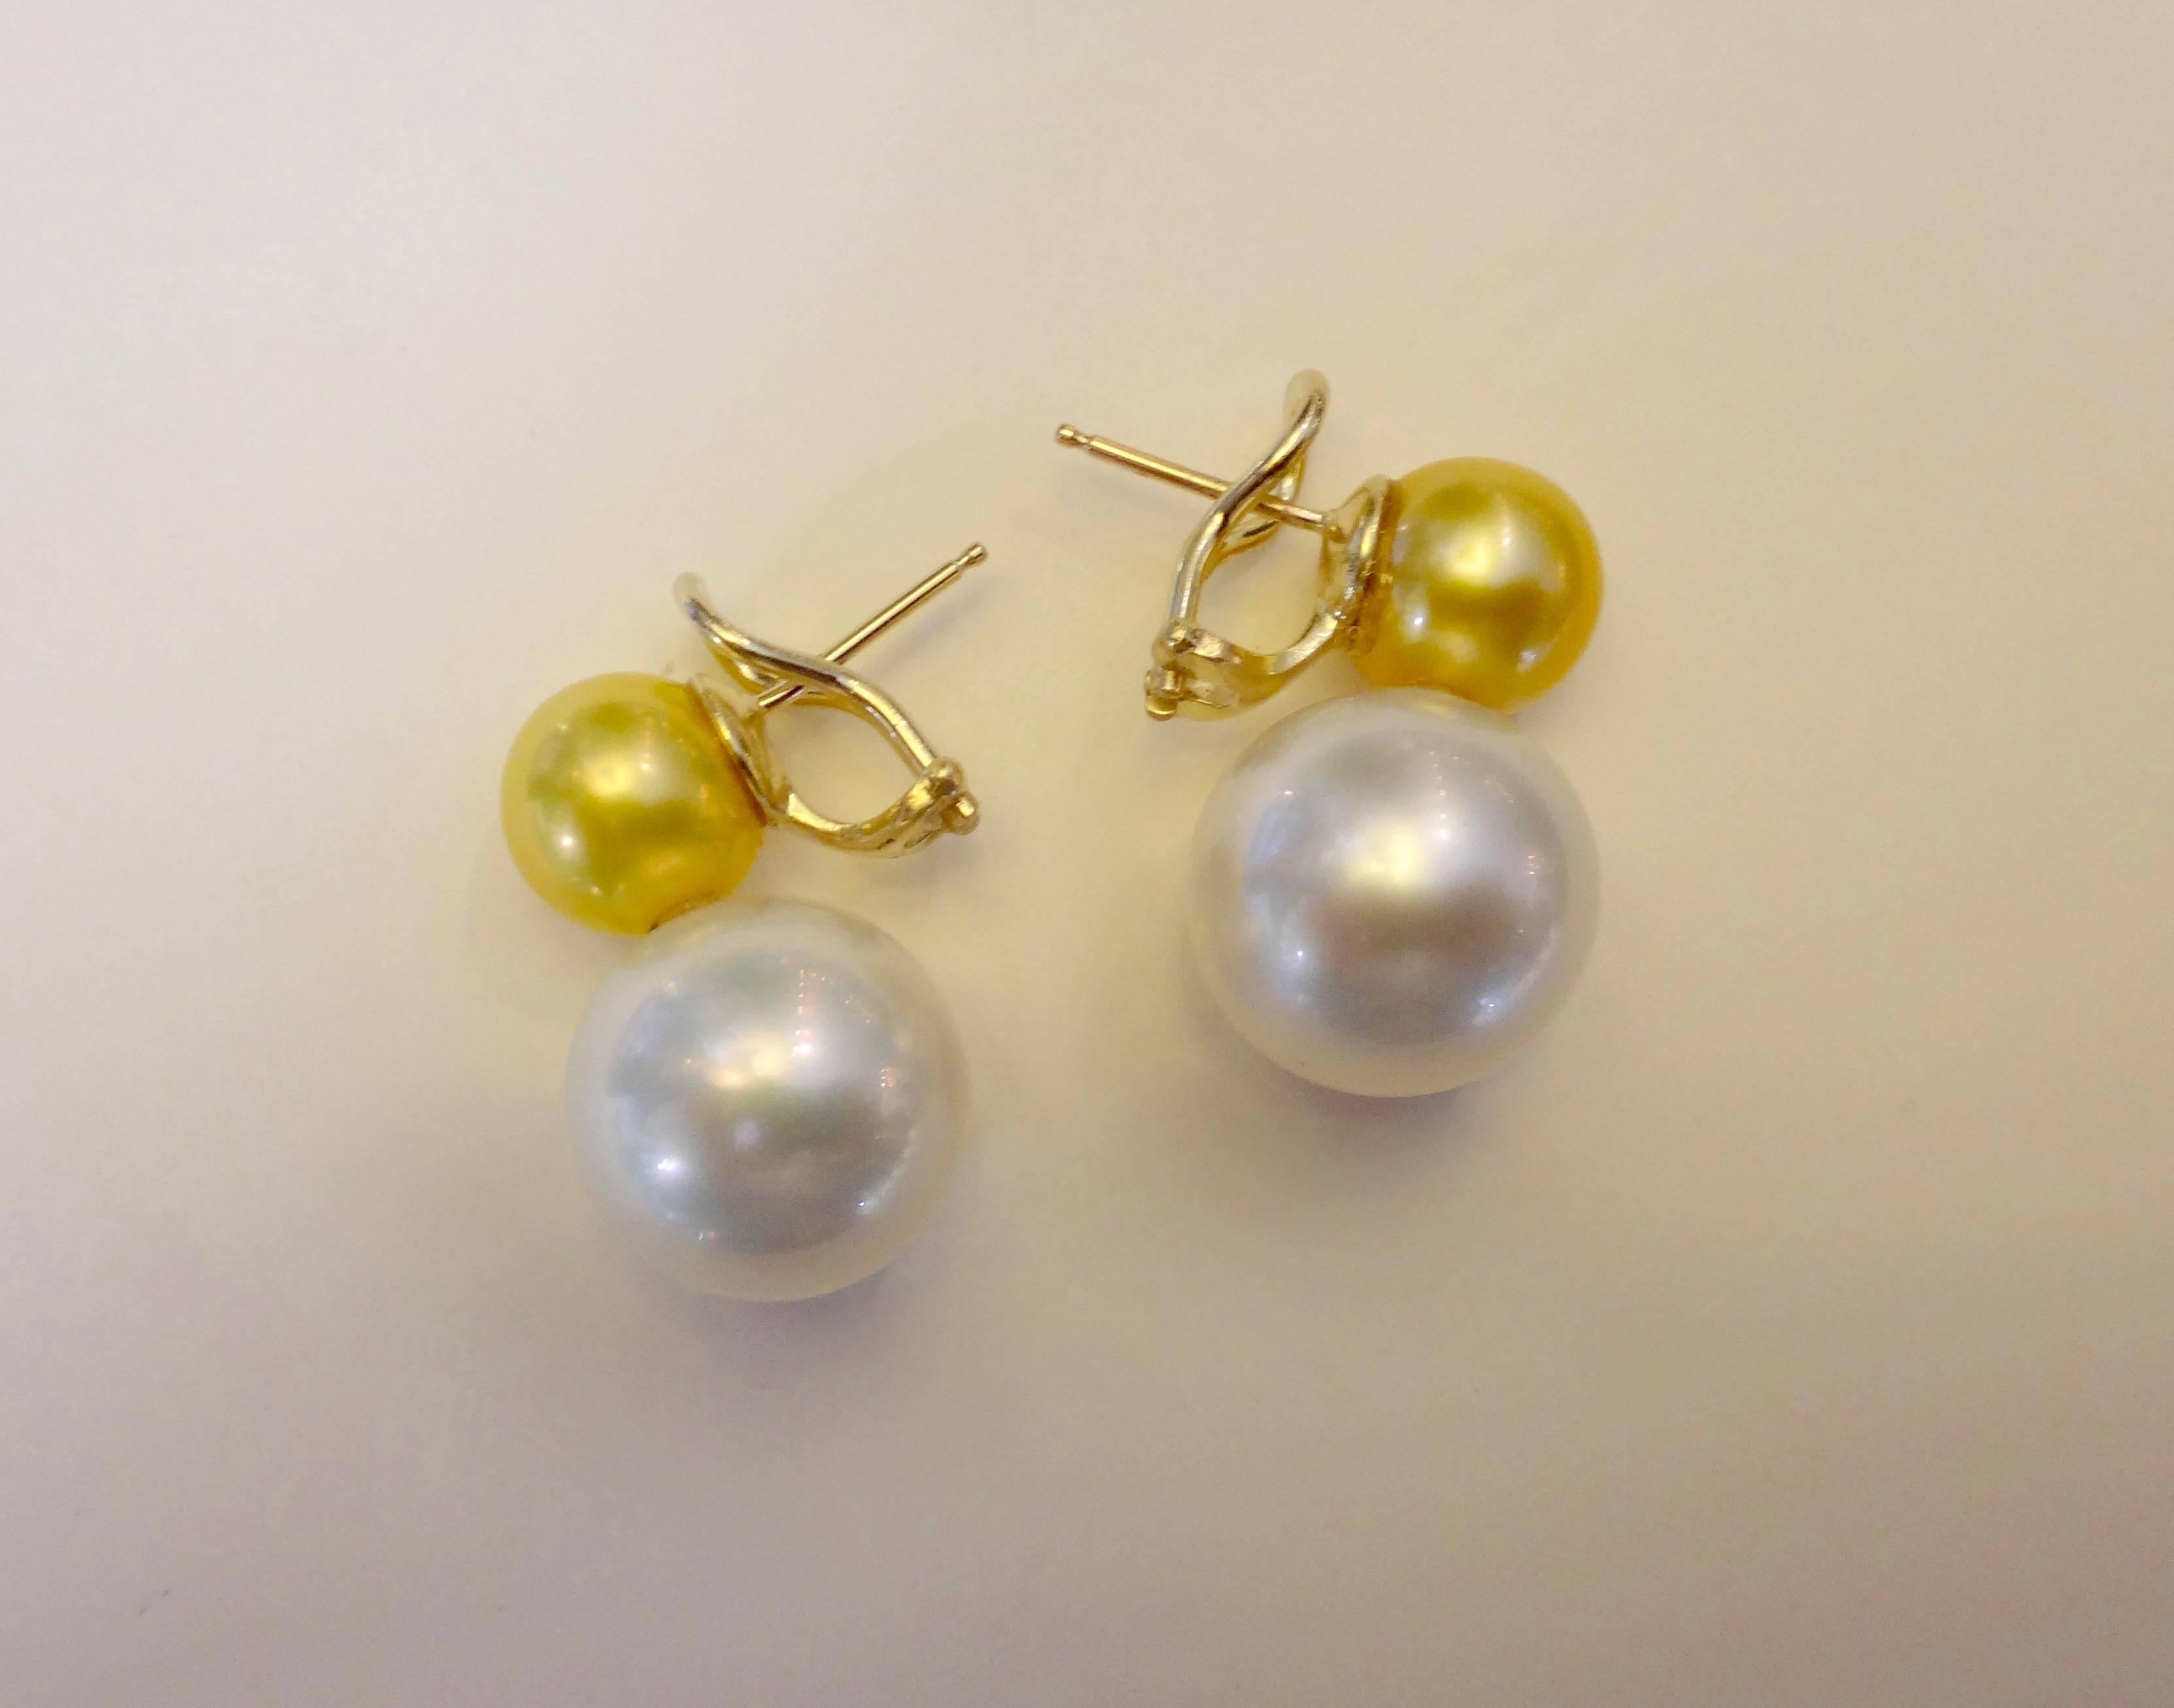 Gem quality golden South Seas pearls are paired with massive (15.5mm) gem quality Paspaley white South Seas pearls in these classic 